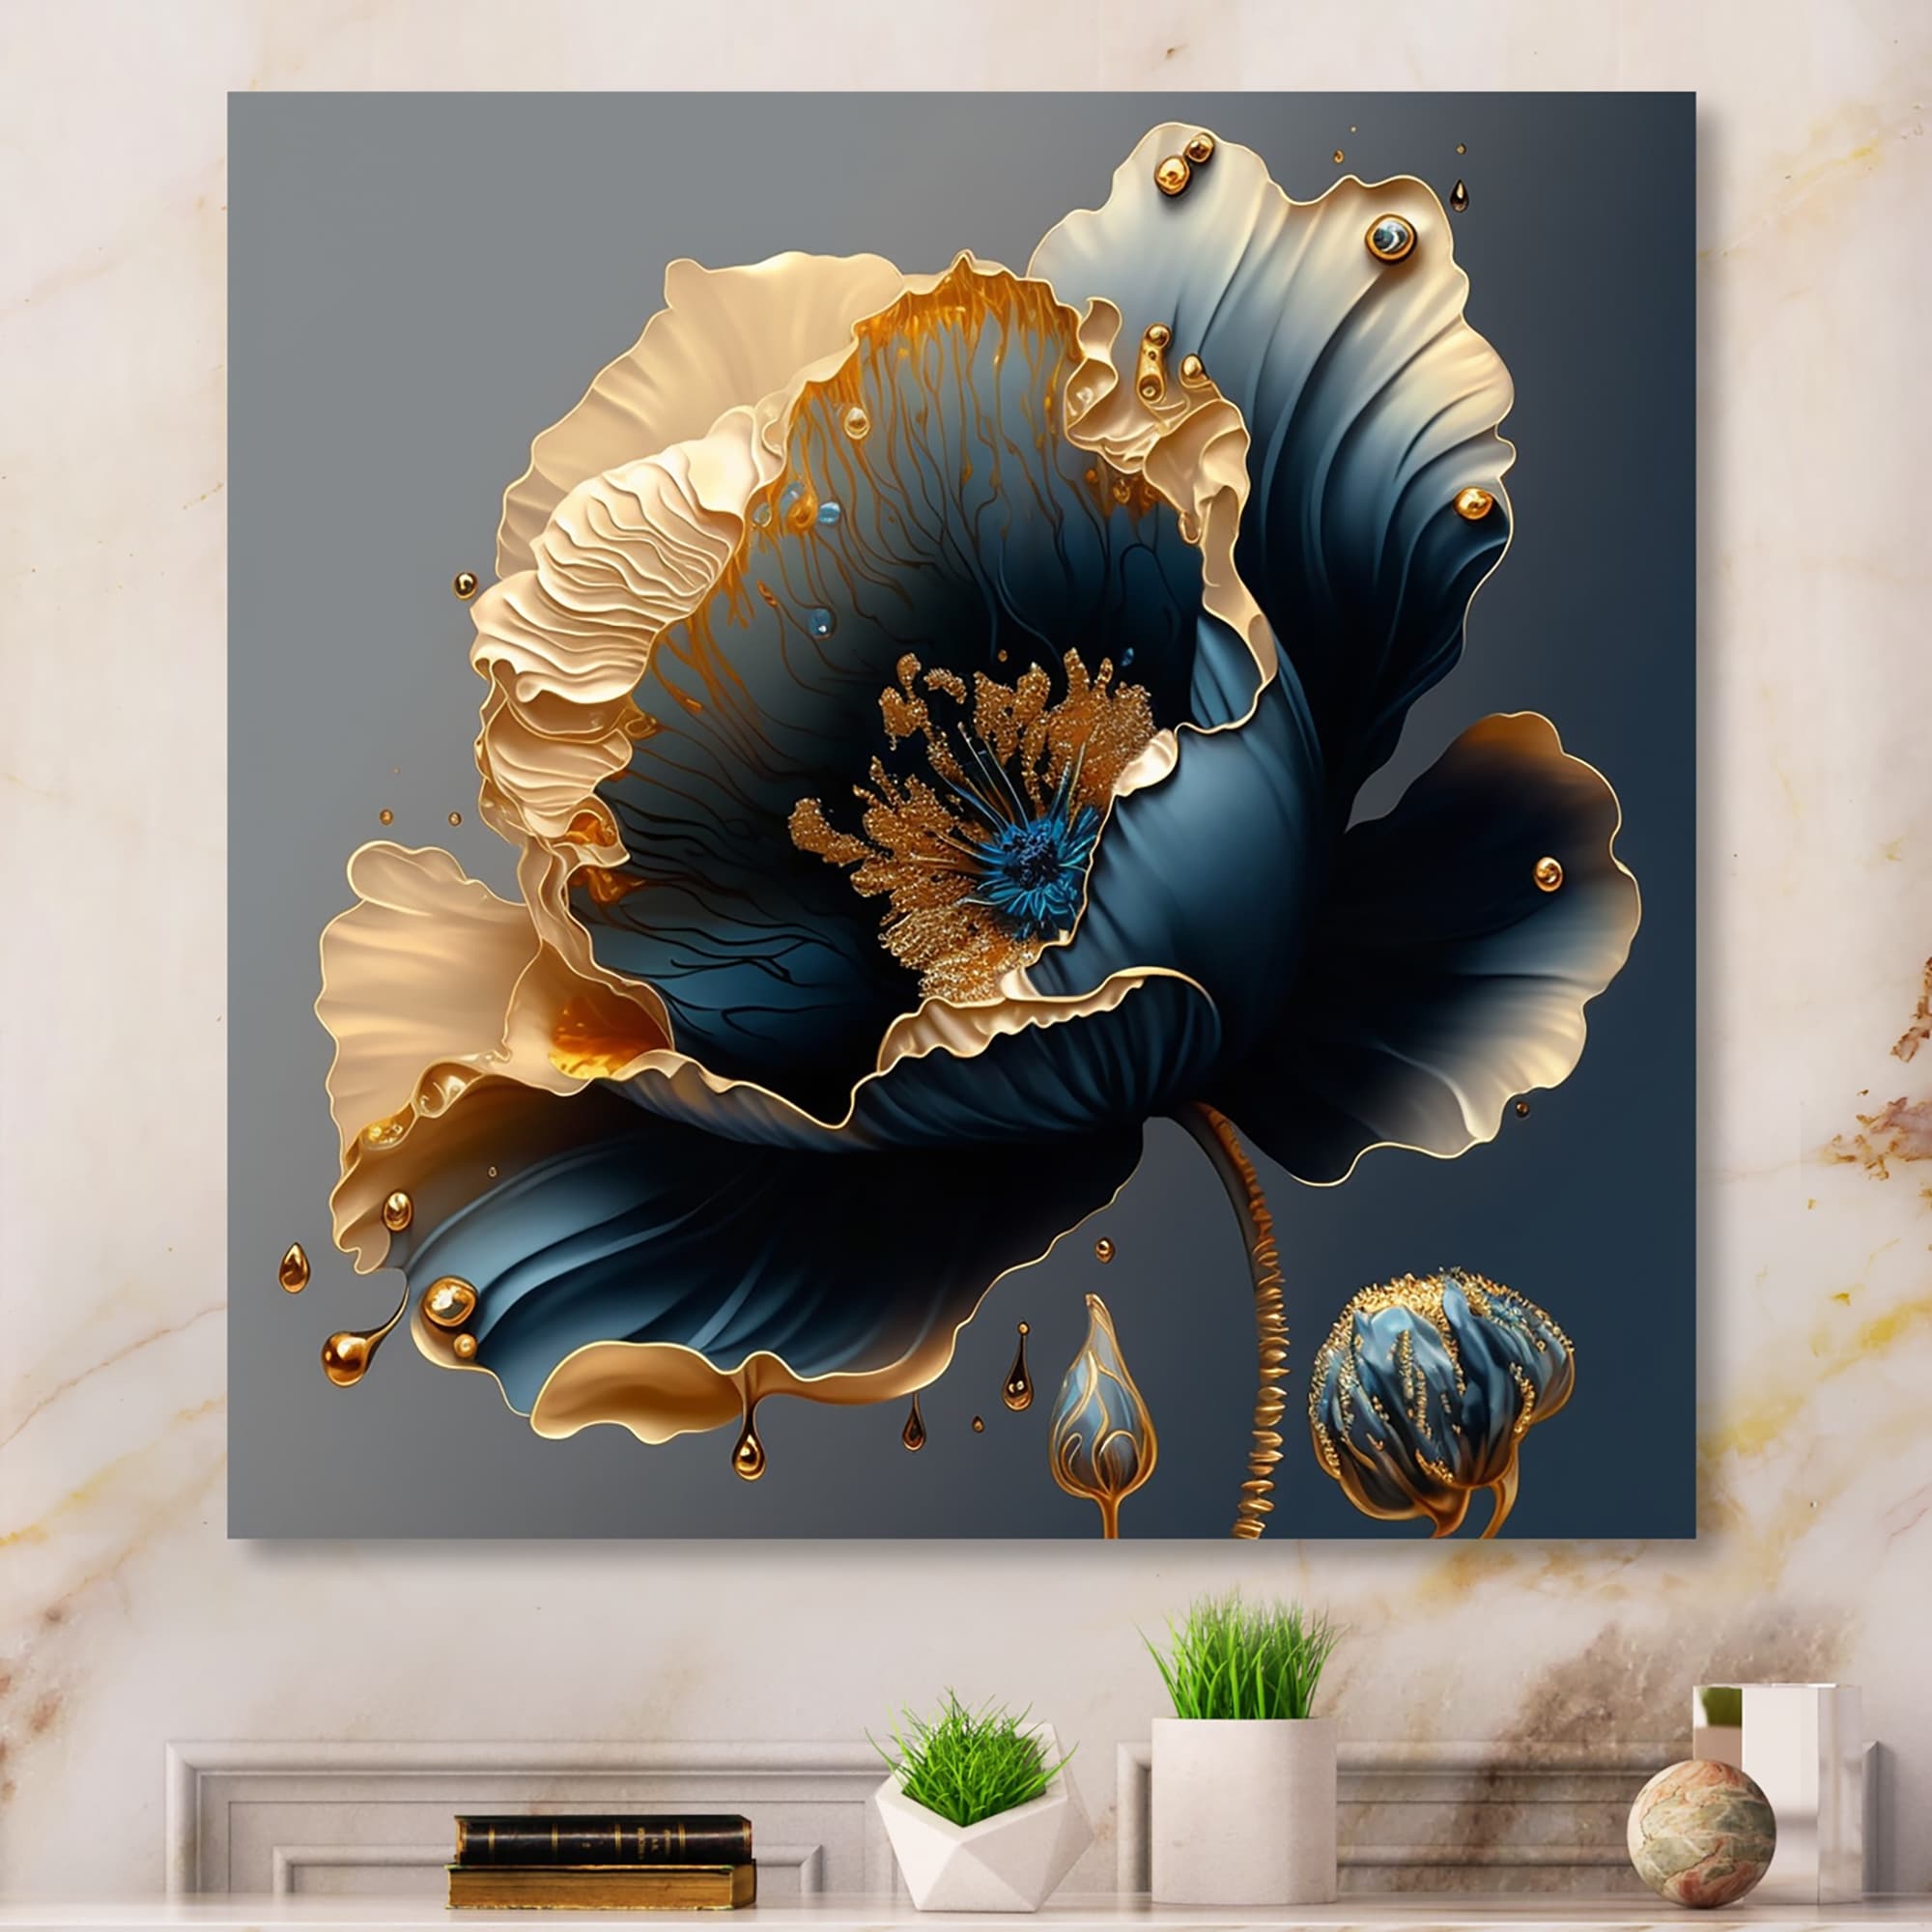 https://ak1.ostkcdn.com/images/products/is/images/direct/6f100a89112c7946a2434d7dc441dc3b9abecea5/Designart-%27Deep-Blue-And-Gold-Single-Flower-IV%27-Floral-%26-Botanical-Canvas-Wall-Art.jpg